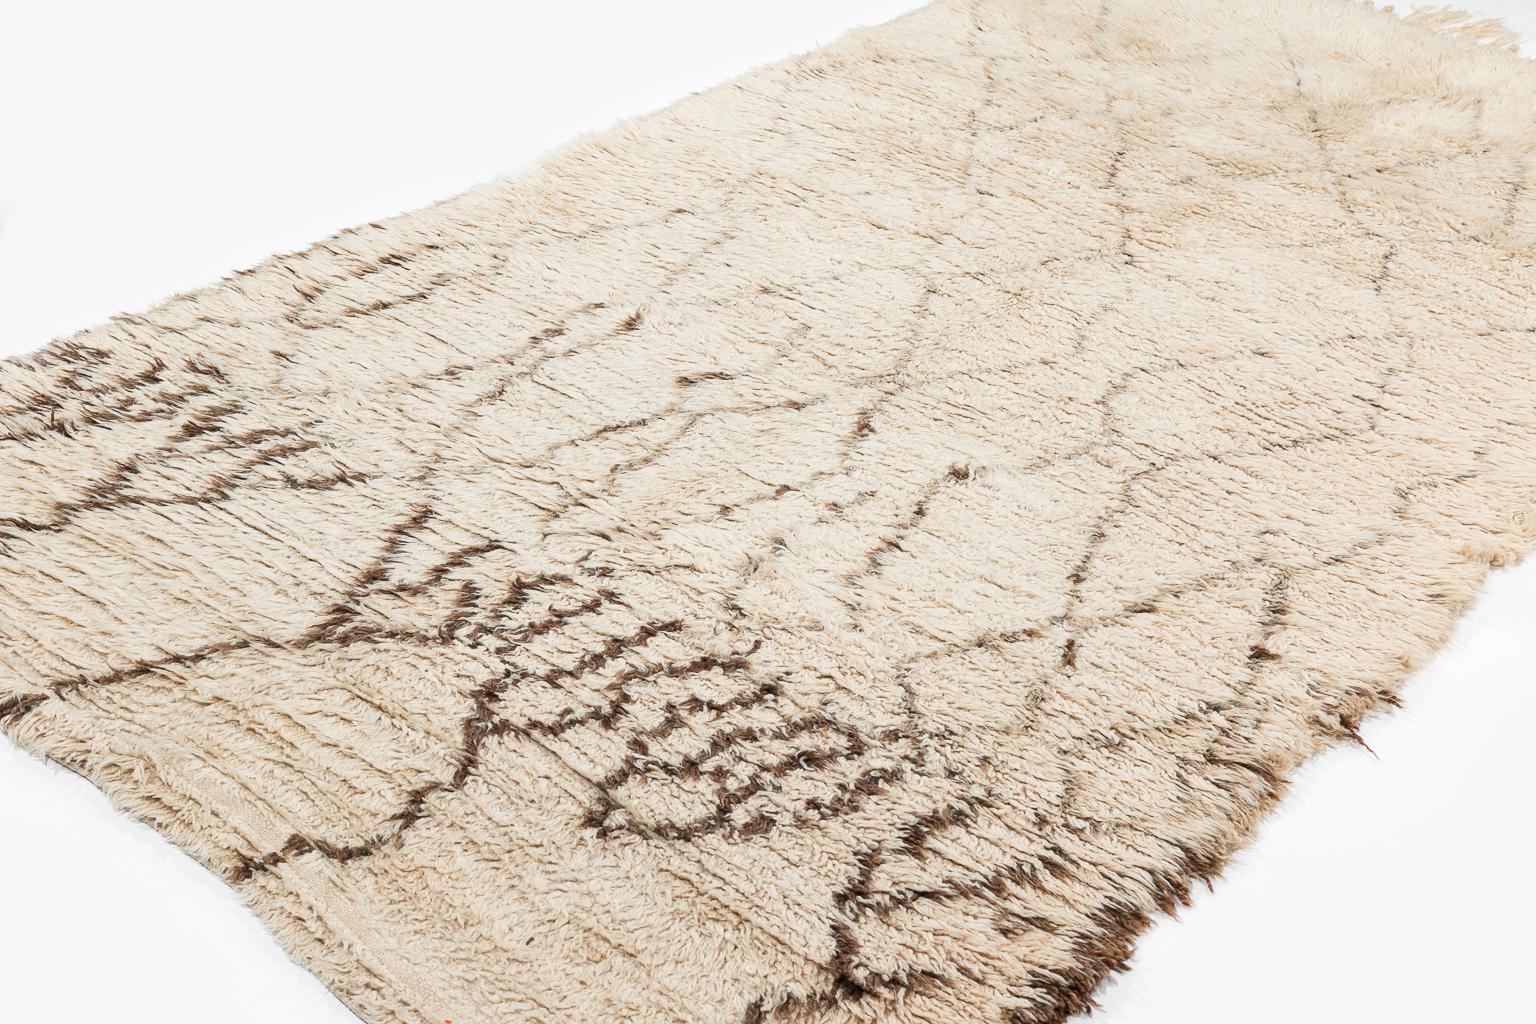 This Beni Ouarain Berber rug is in the top range of what one can find today in authentic vintage Beni white rugs. Calm overall but with an impressive drawing on the beginning side that makes quite a statement. The texture of the wool has that silky